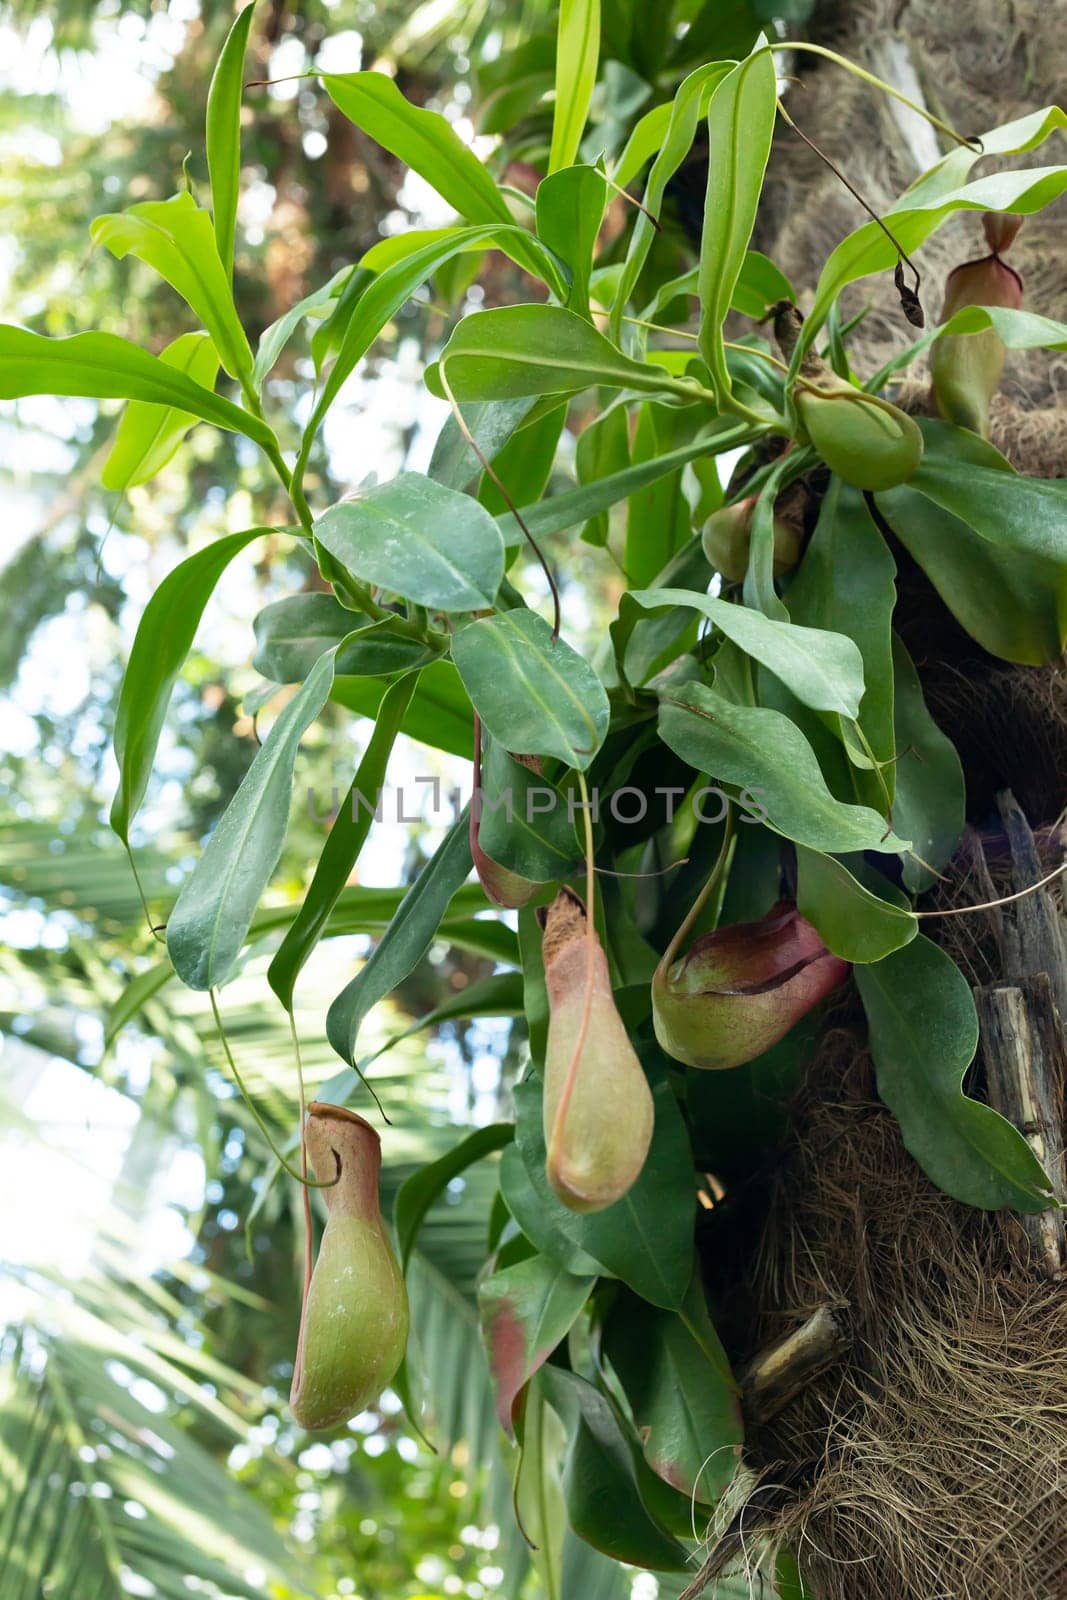 Nepenthes also called monkey cup, carnivorous, tropical pitcher plant in the garden. Nature blurry background. Vertical plane.